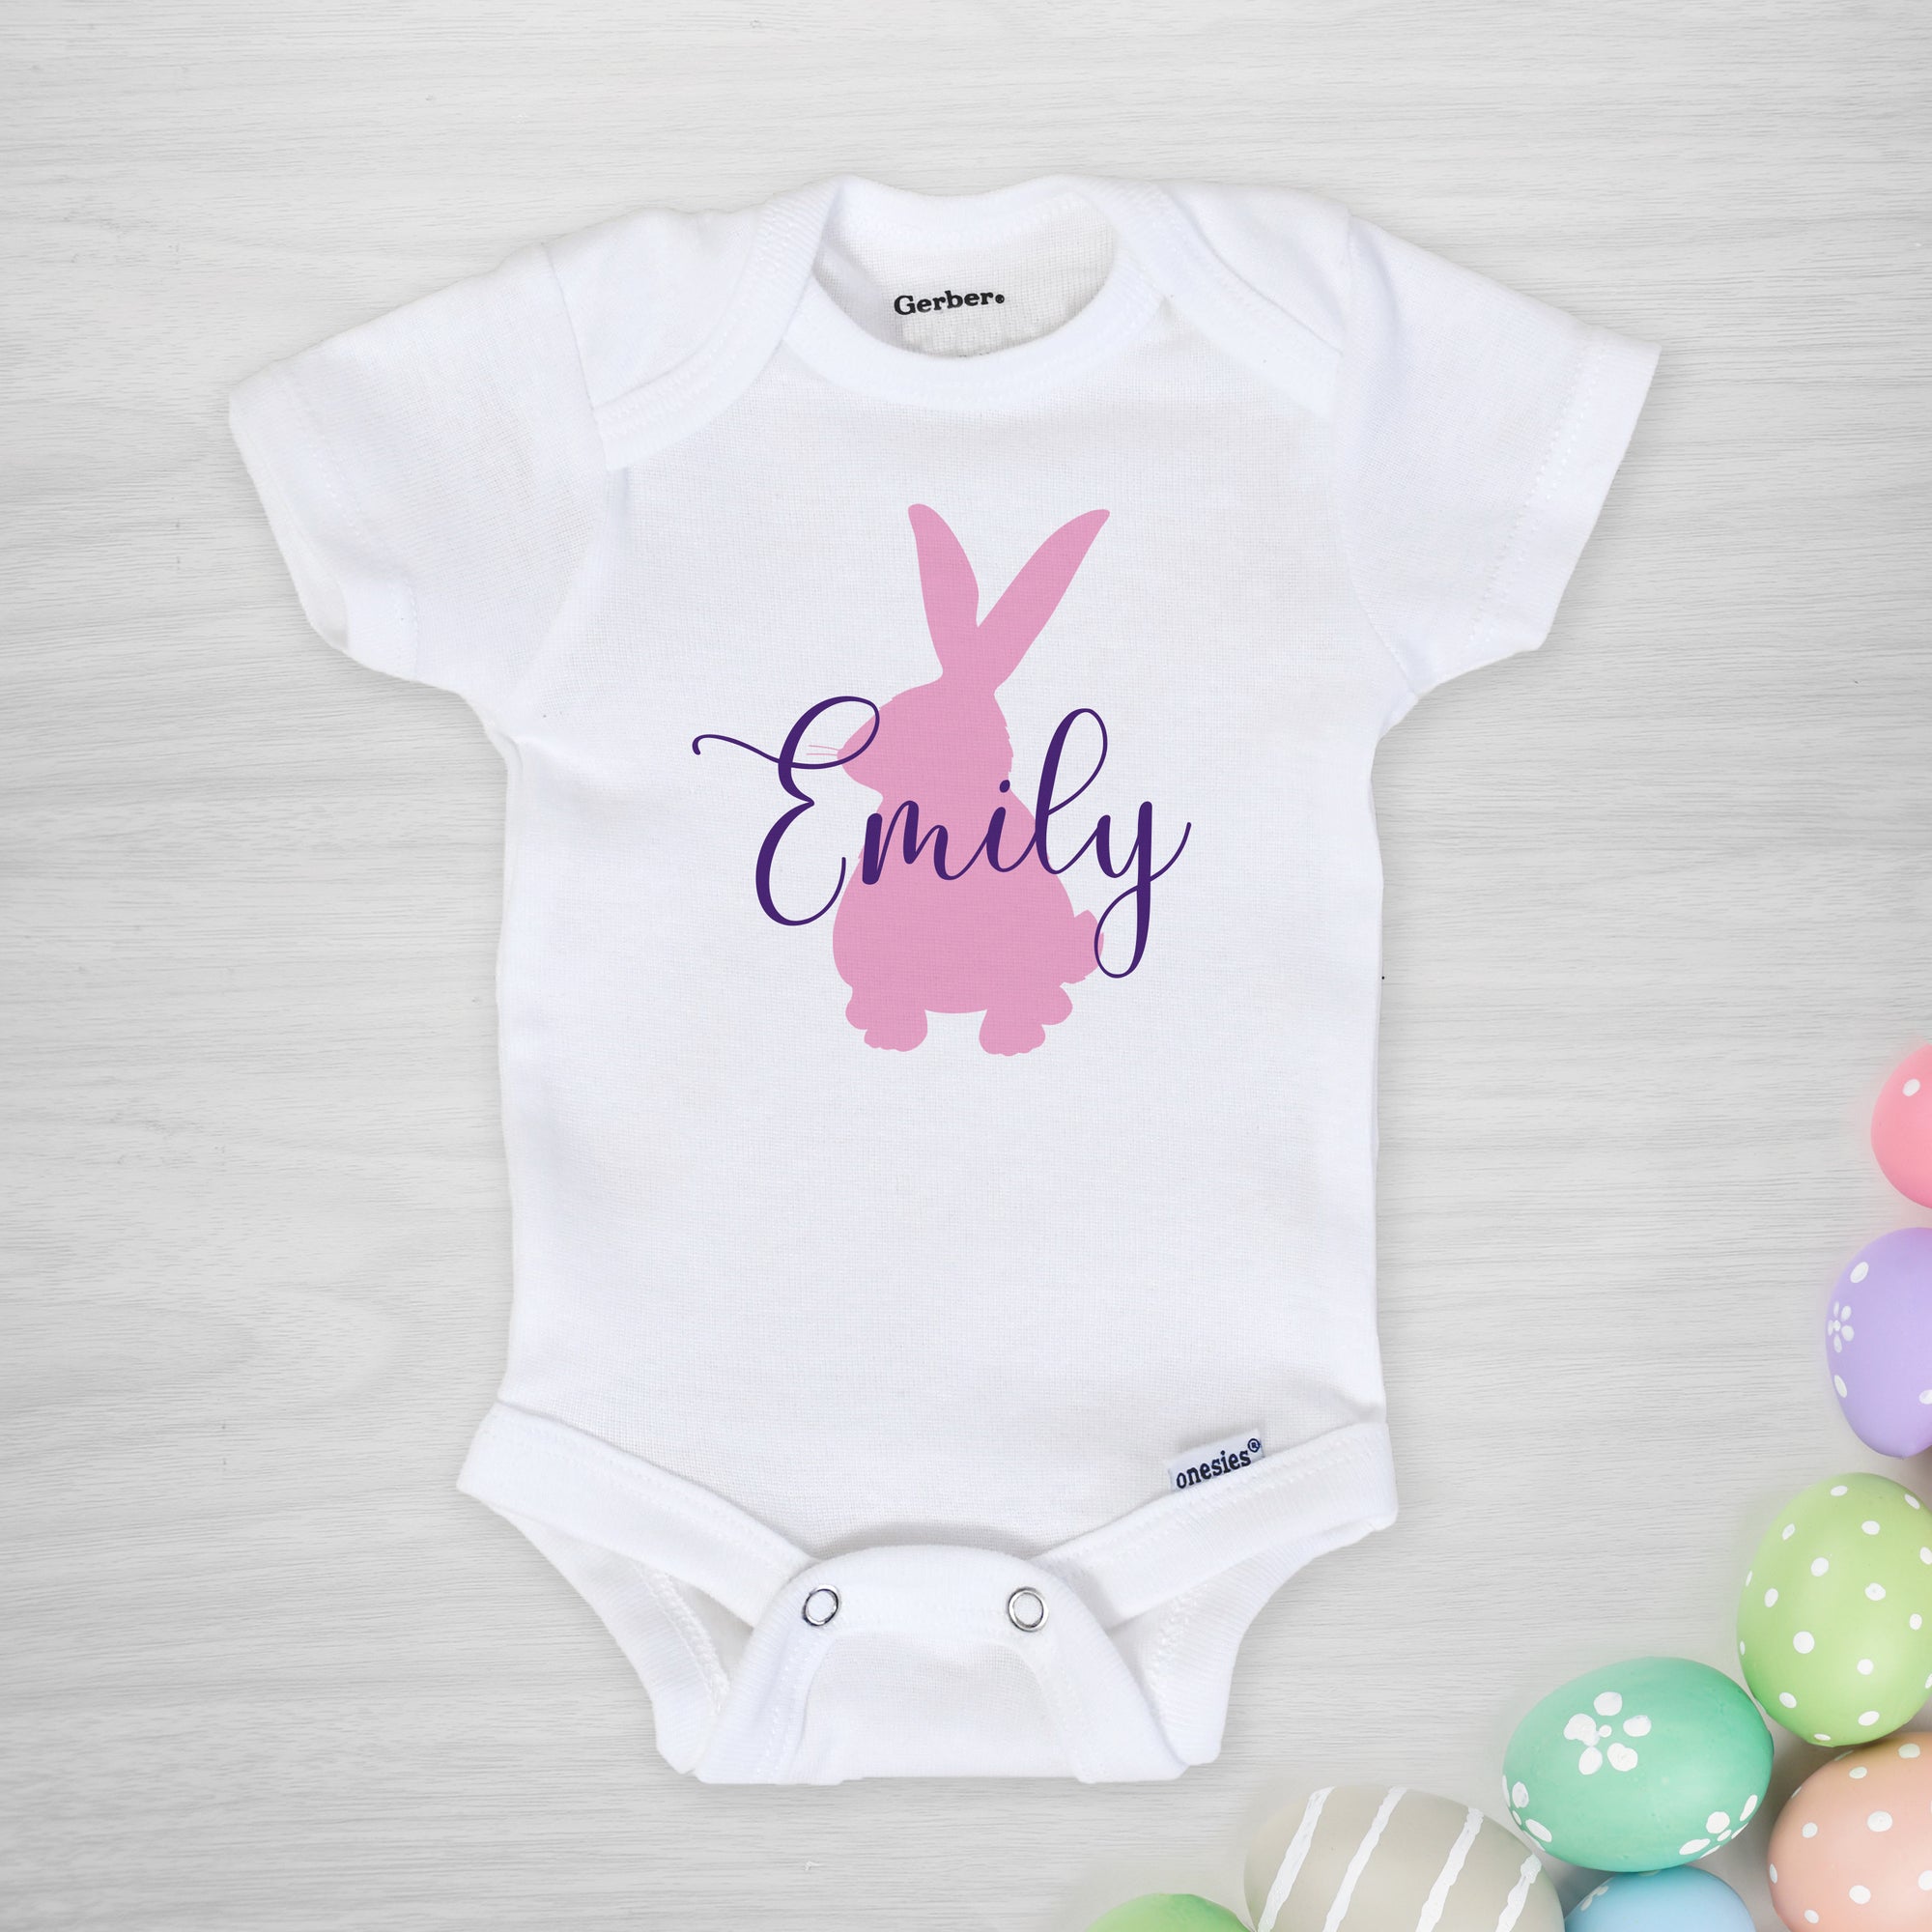 Bunny Silhouette Personalized Gerber Onesie®, Pick your colors, long sleeved